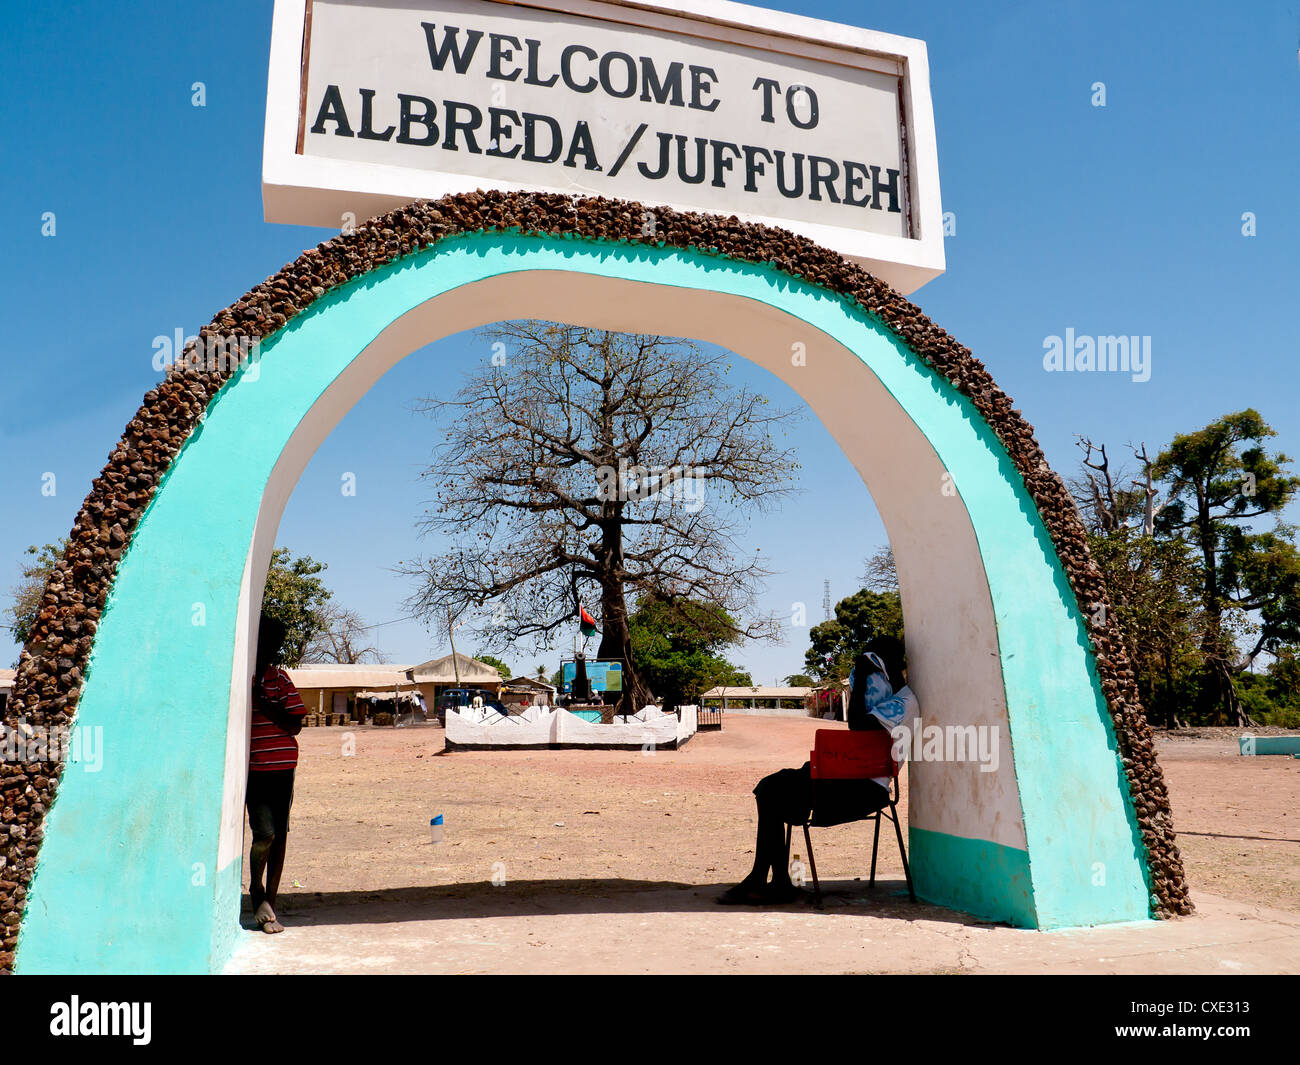 Entrance to the slave museum on the Island ot Albreda Island, Juffureh, the home of Roots, The Gambia, West Africa Stock Photo